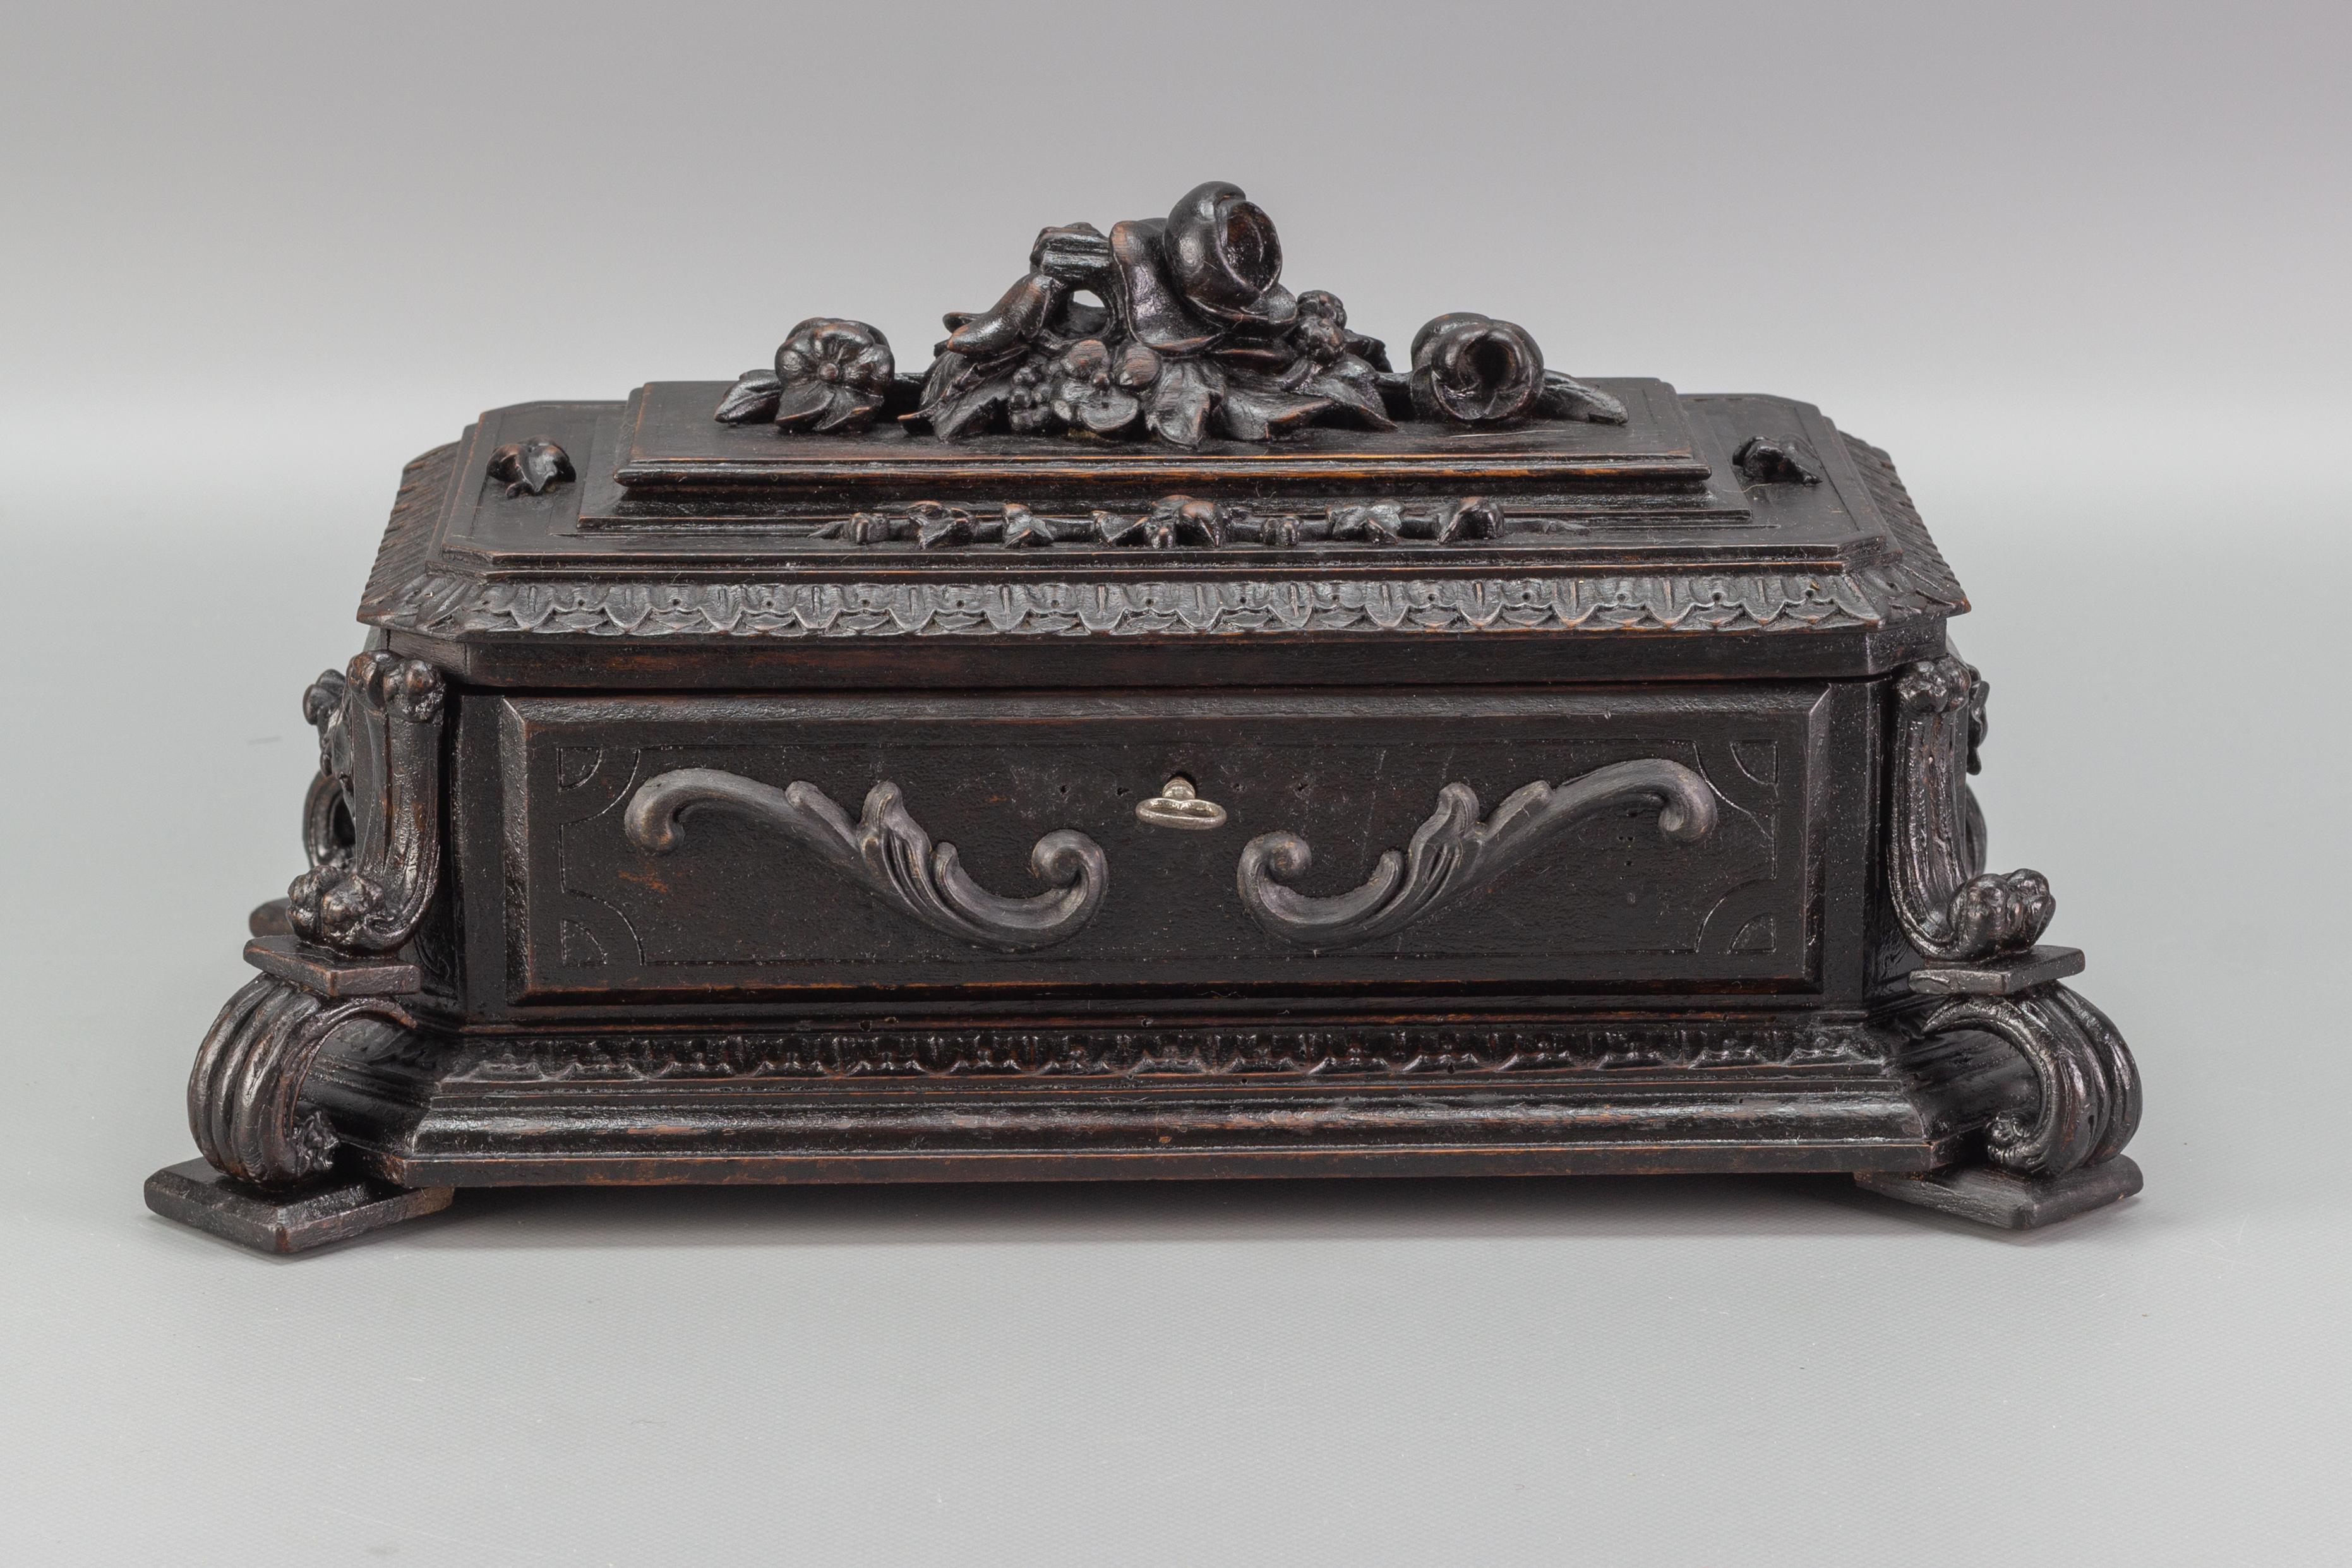 A beautiful hand-carved wooden jewelry box with a green velvet interior and key, Germany, circa 1900. Masterfully carved floral top and carved leaves on the edge of the lid. Adorned with floral carvings on sides and decorative corners.
Dimensions: